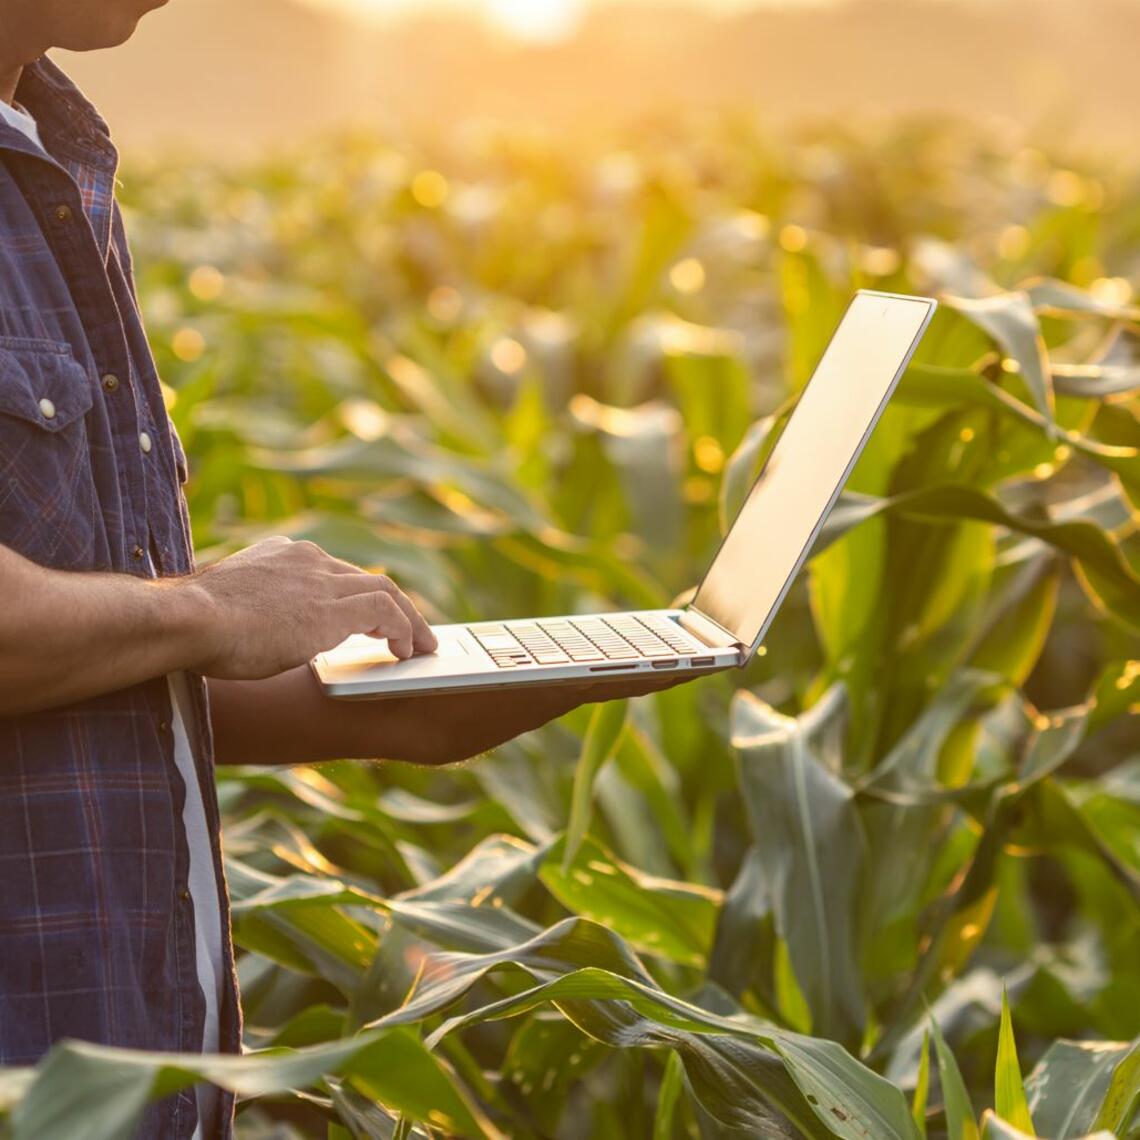 person in blue shirt in side profile looking at laptop screen while standing in field of corn